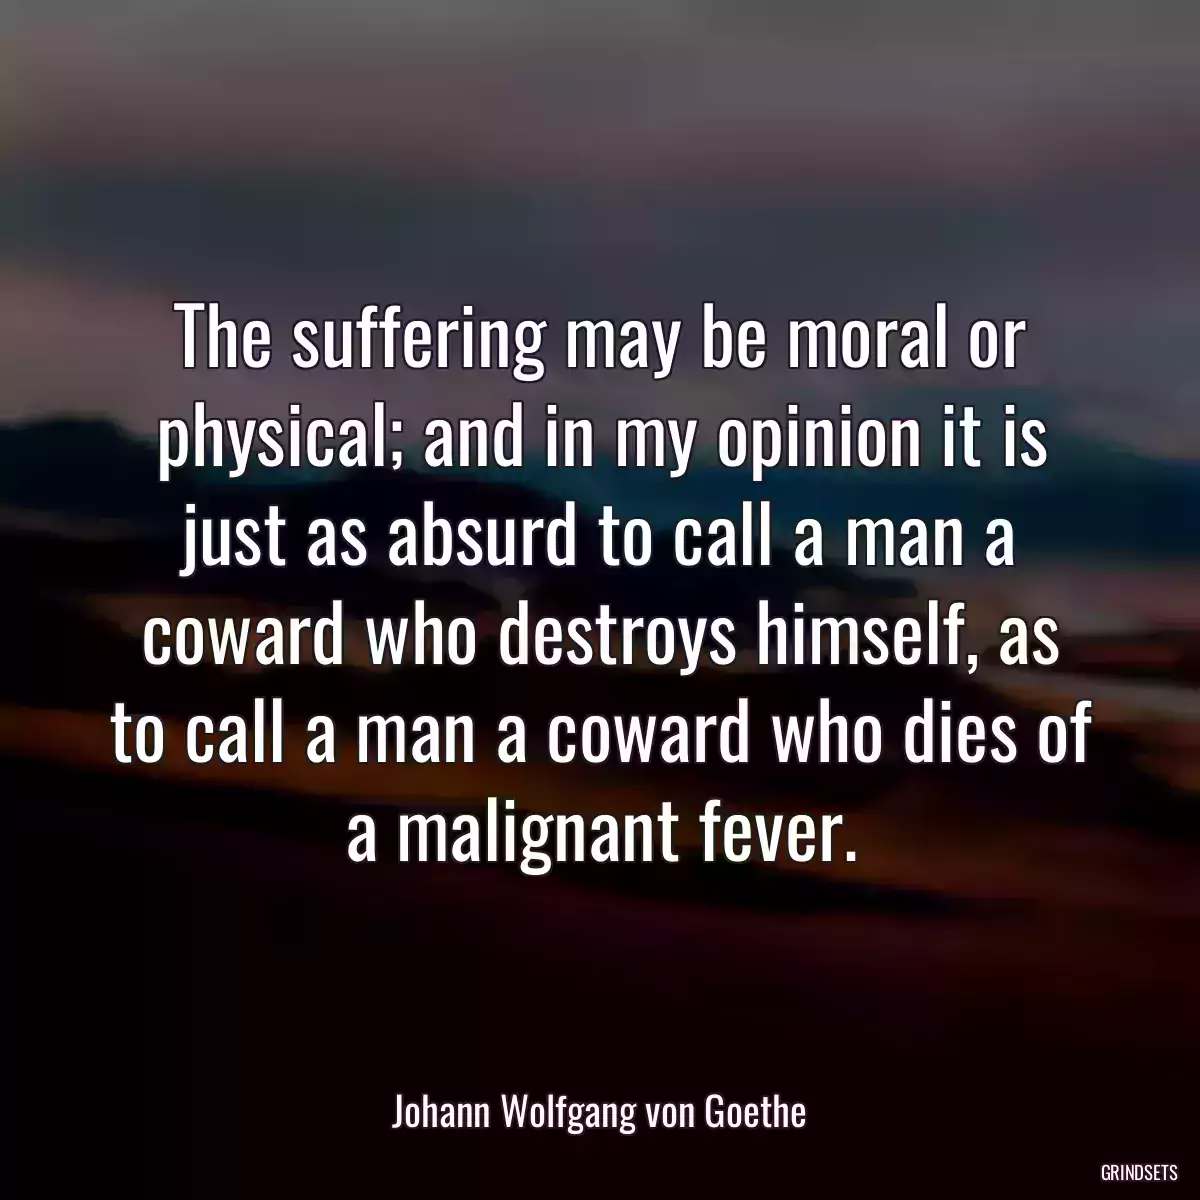 The suffering may be moral or physical; and in my opinion it is just as absurd to call a man a coward who destroys himself, as to call a man a coward who dies of a malignant fever.